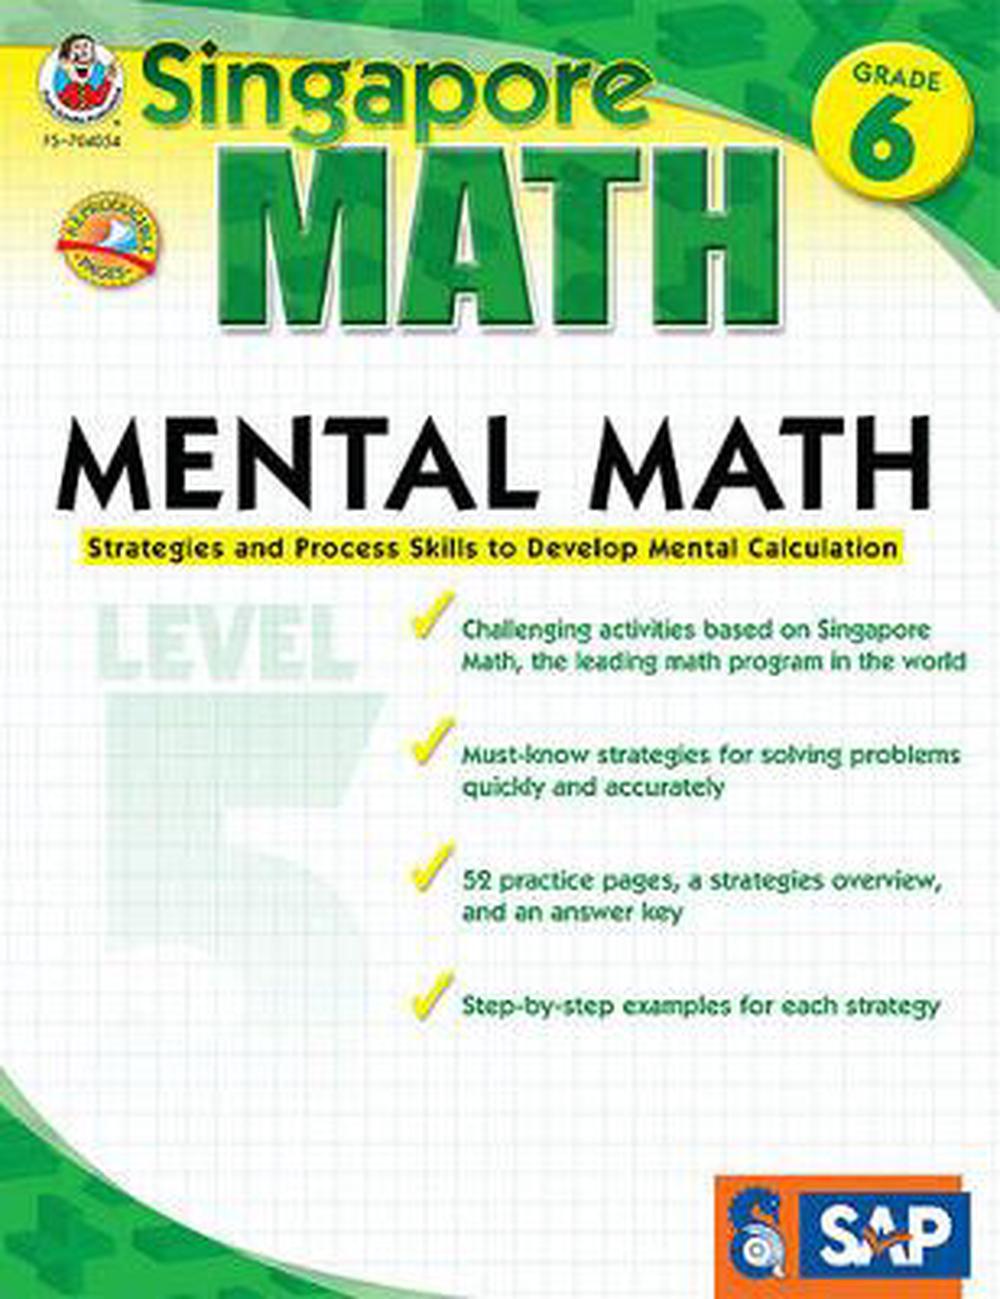 Paperback,　Mental　online　6:　at　Process　to　Math,　Nile　Fs704054,　by　Grade　Skills　Calculation　Strategies　Mental　and　Develop　The　9781936024124　Buy